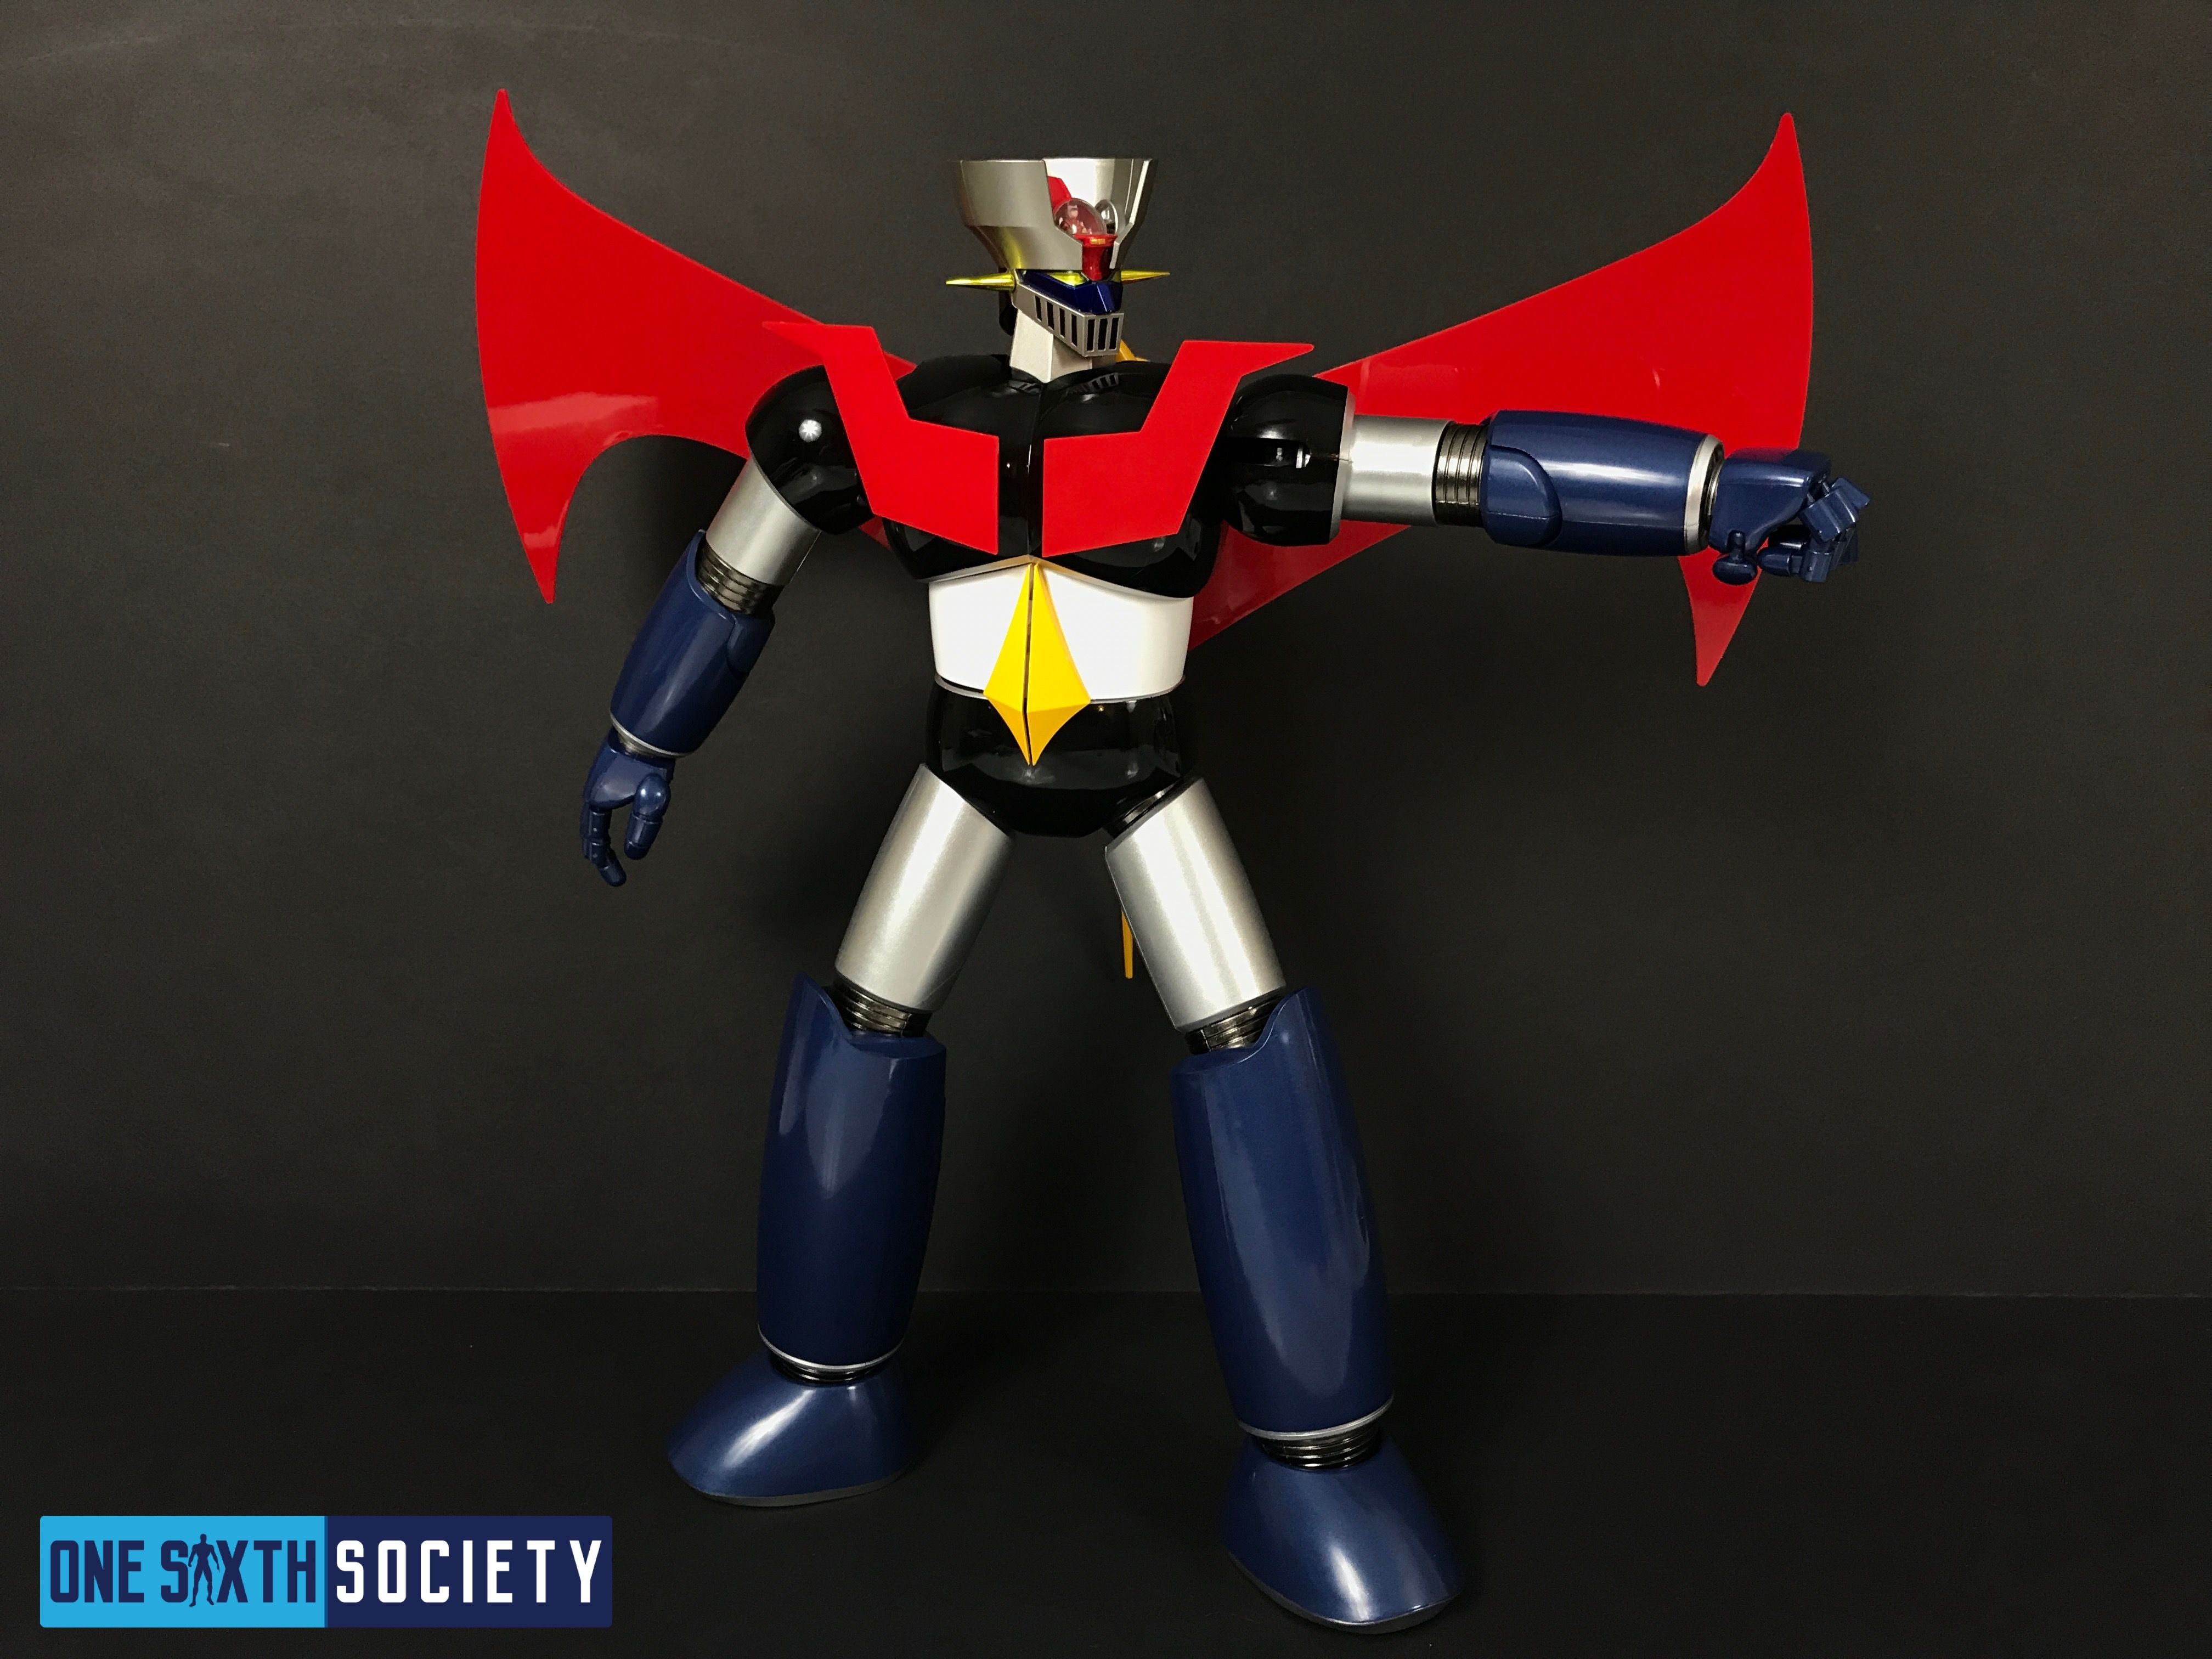 The Future Quest Mazinger Z has Functioning Rocket Punch Fists